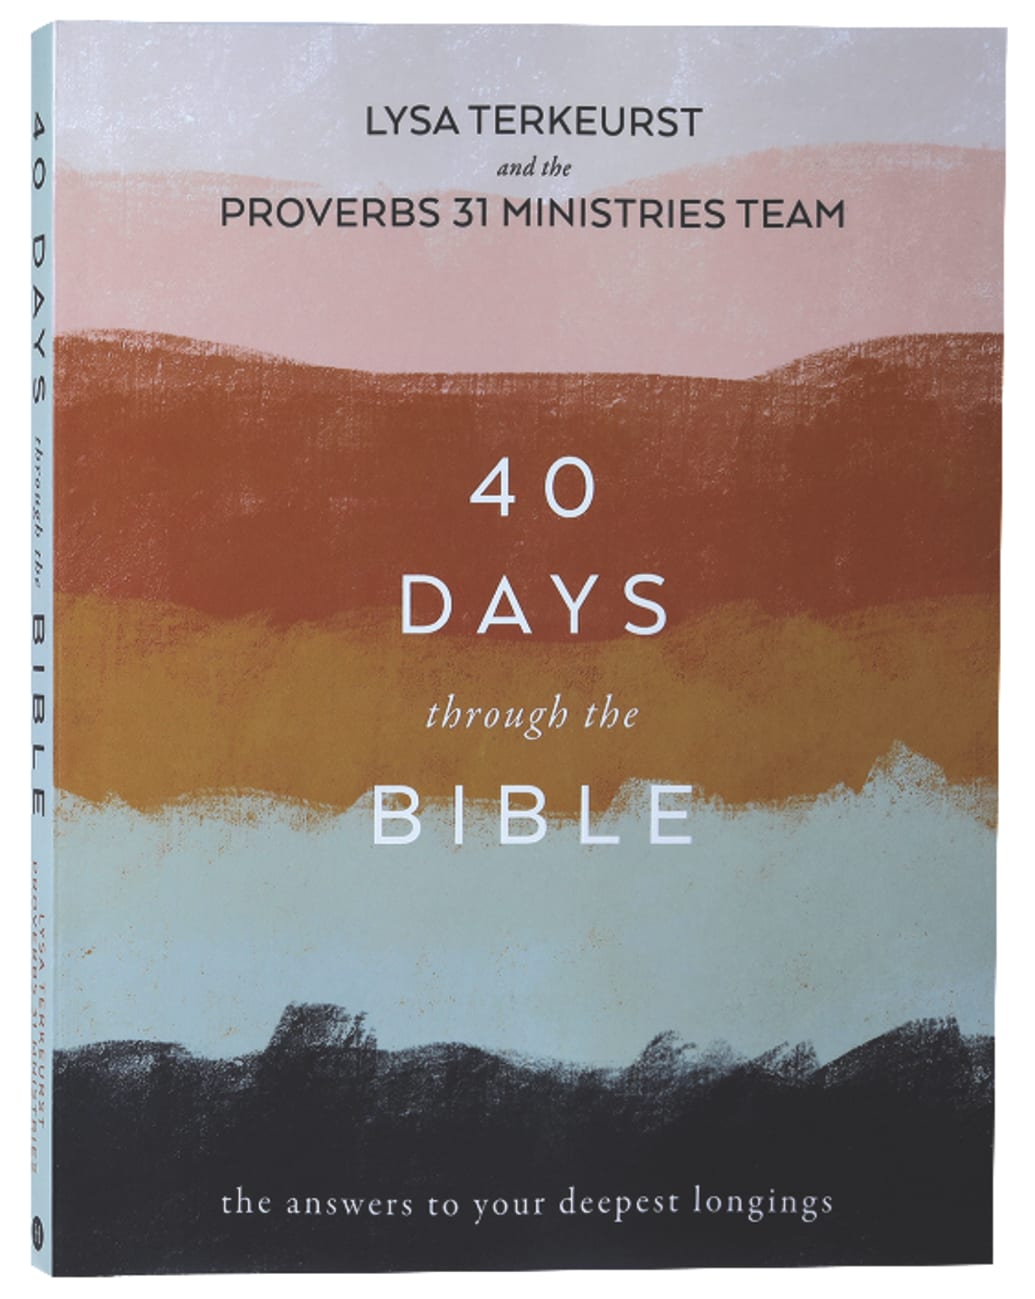 40 DAYS THROUGH THE BIBLE: THE ANSWERS TO YOUR DEEPEST LONGINGS